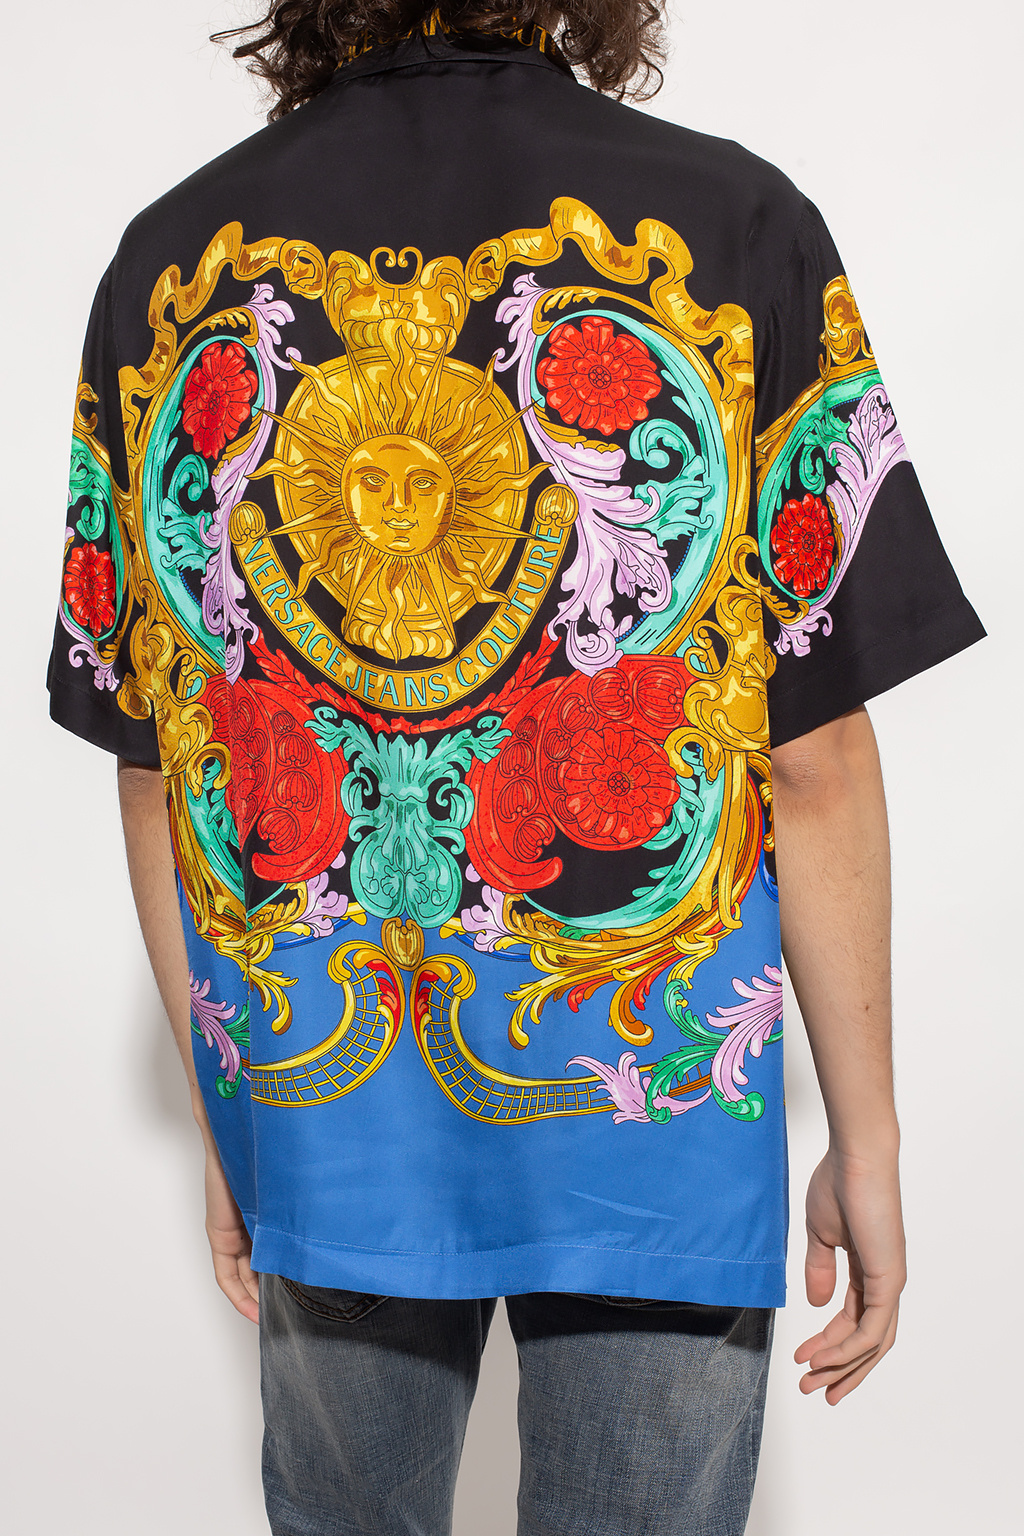 Versace Jeans Couture shirt Logo with ‘Sun Flower Garland’ pattern